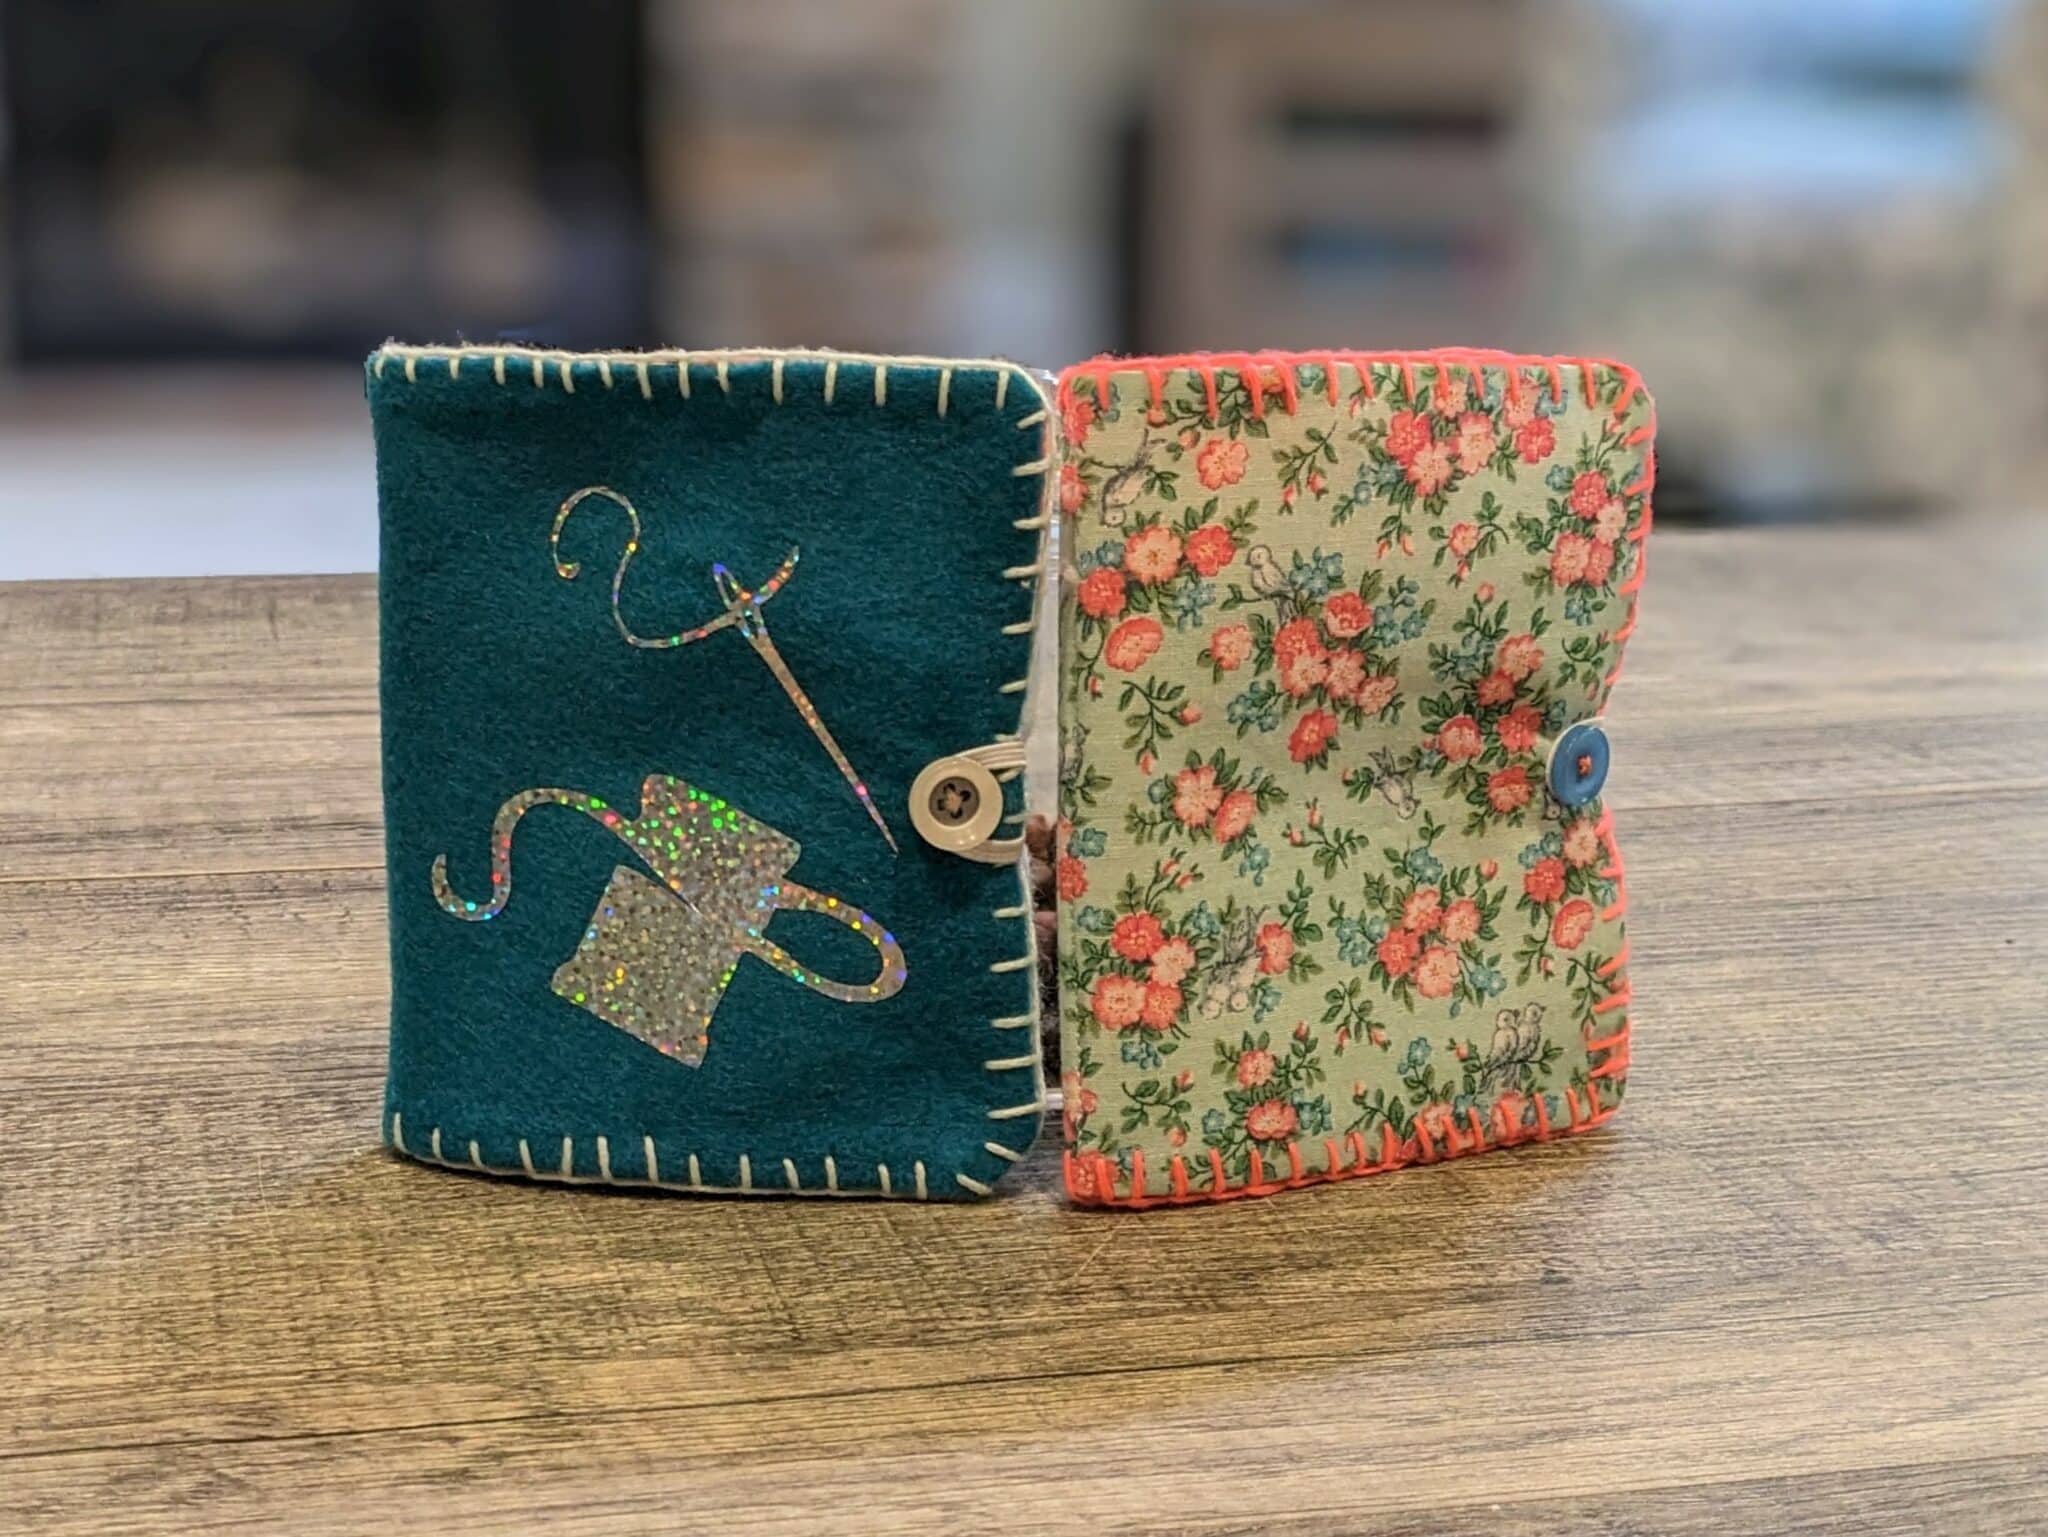 How-To: Magnetic Sewing Pin Holder - Make